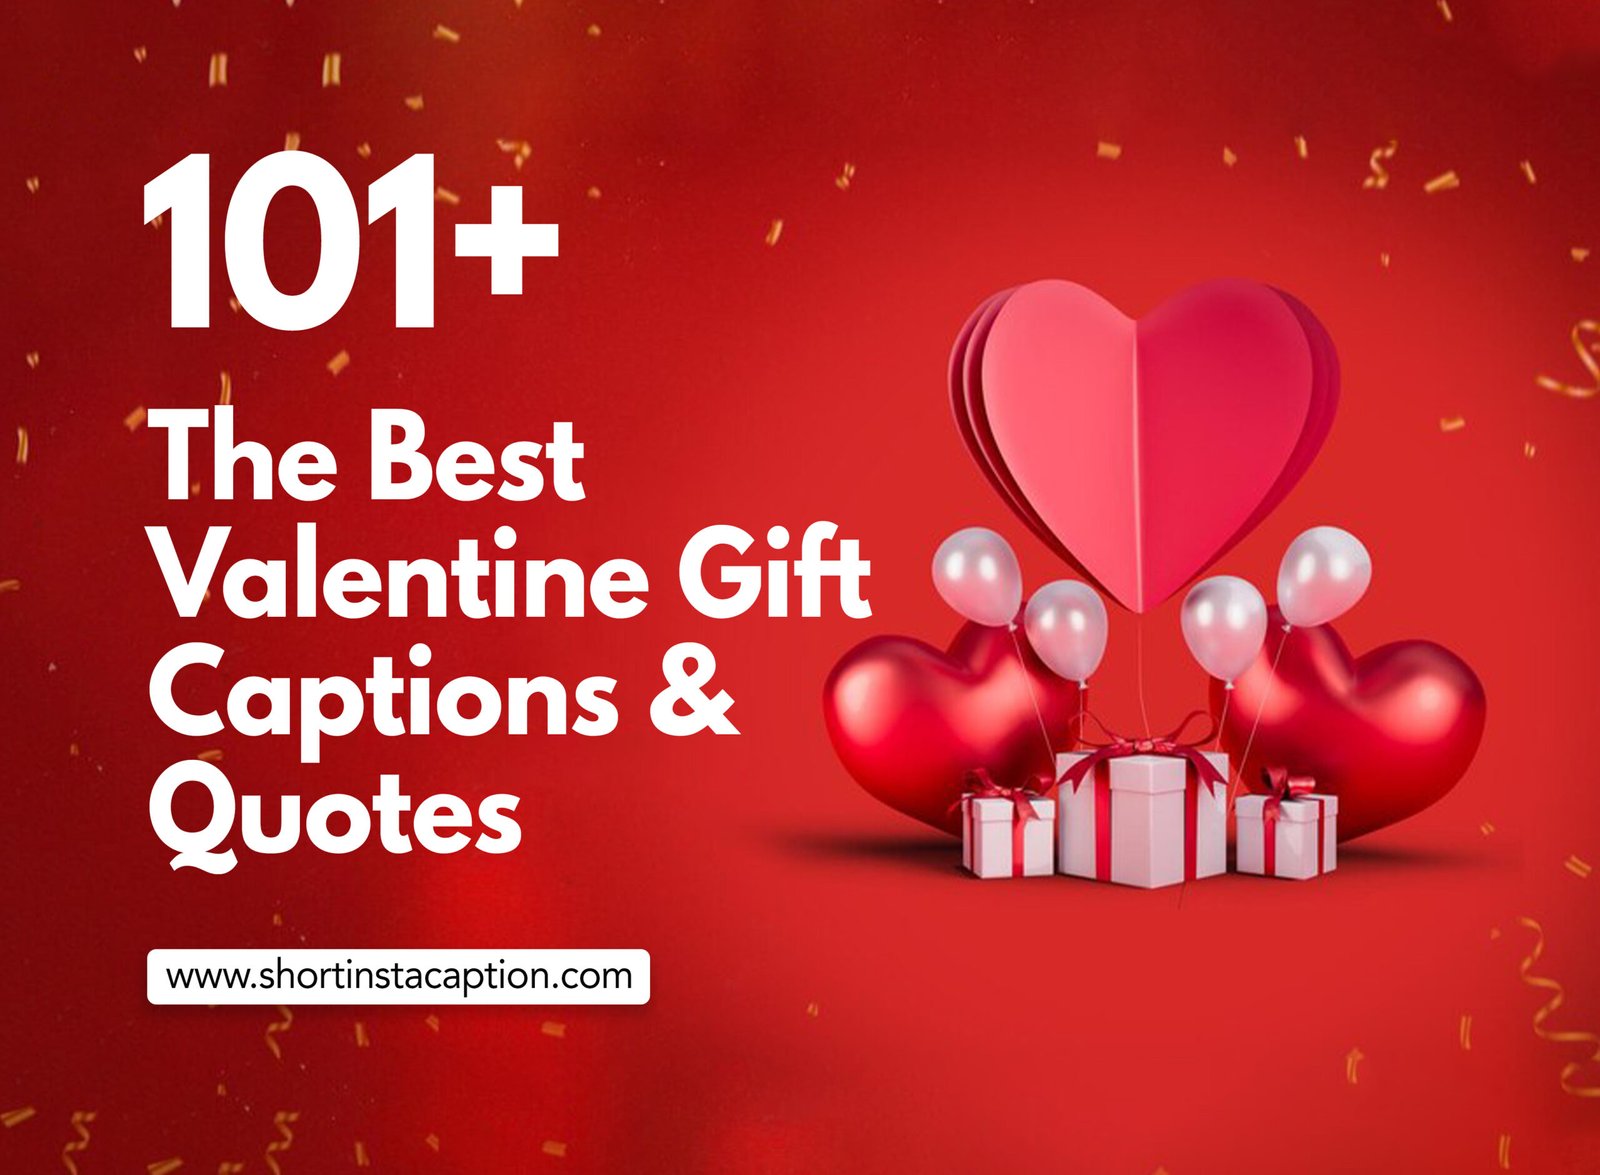 Best Valentine Gift Captions To Post On Social Media